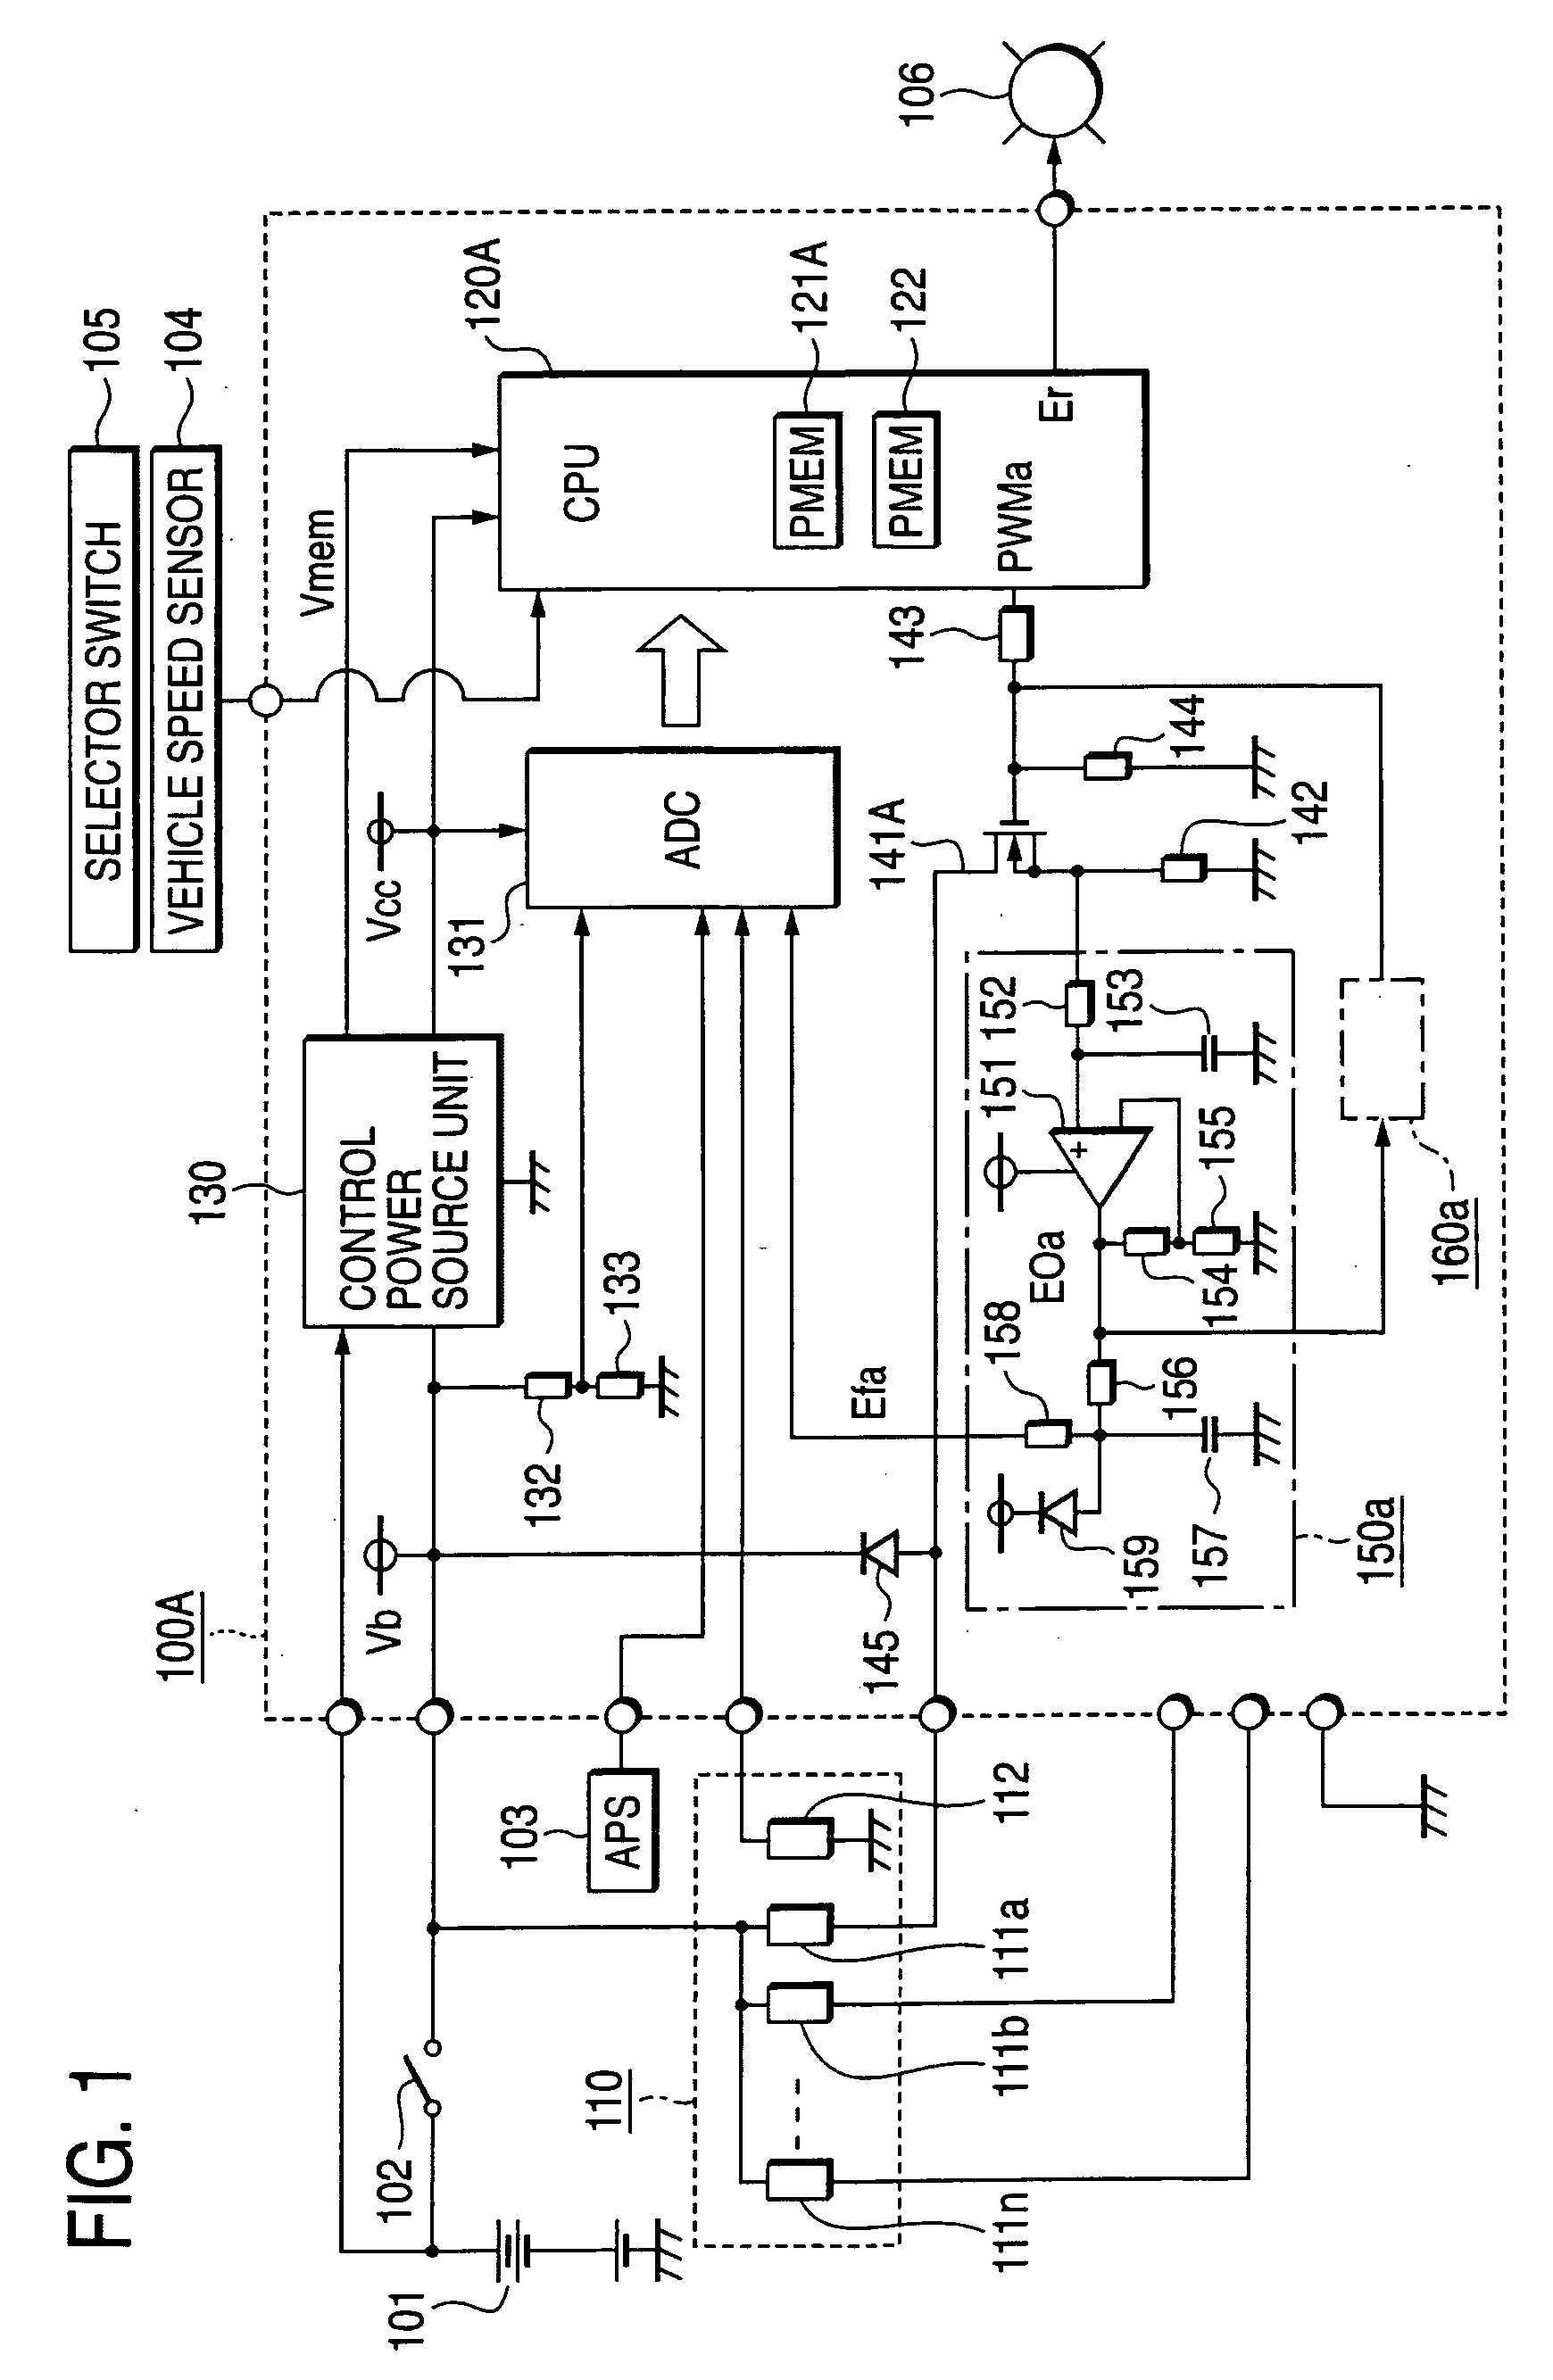 Non-feedback type load current controller